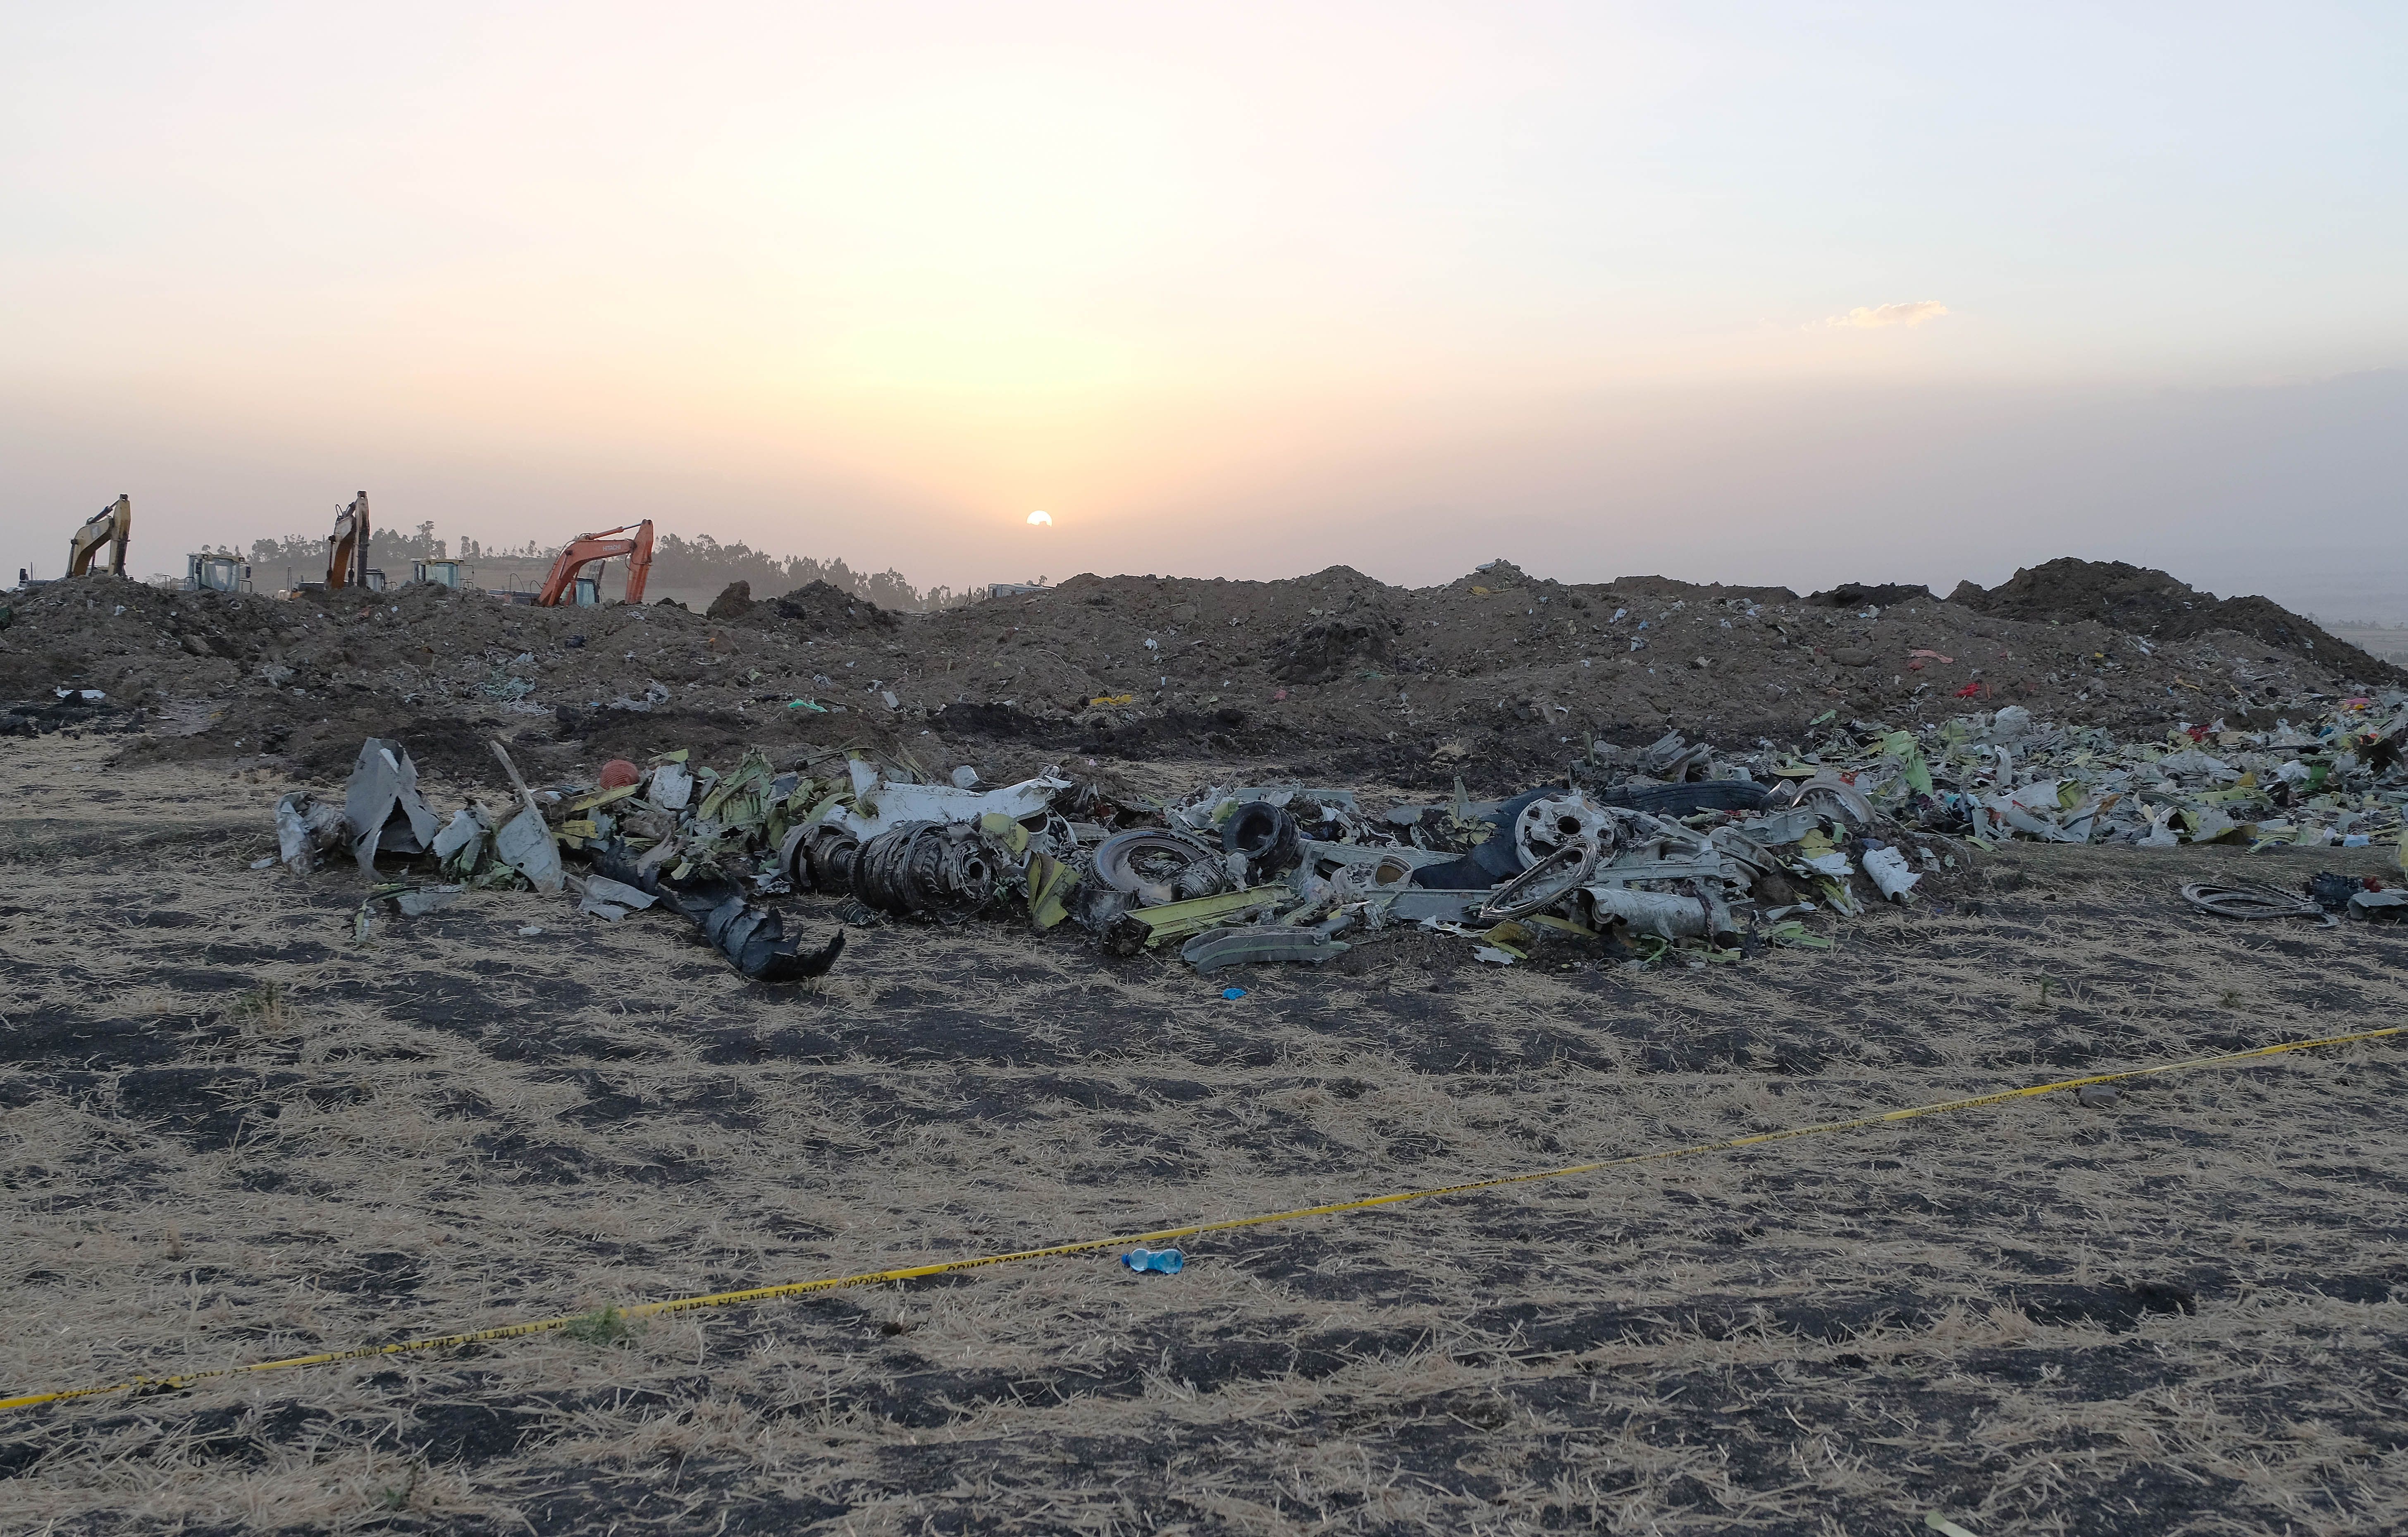 Debris lays piled up just outside the impact crater after being gathered by workers during the continuing recovery efforts at the crash site of Ethiopian Airlines flight ET302.